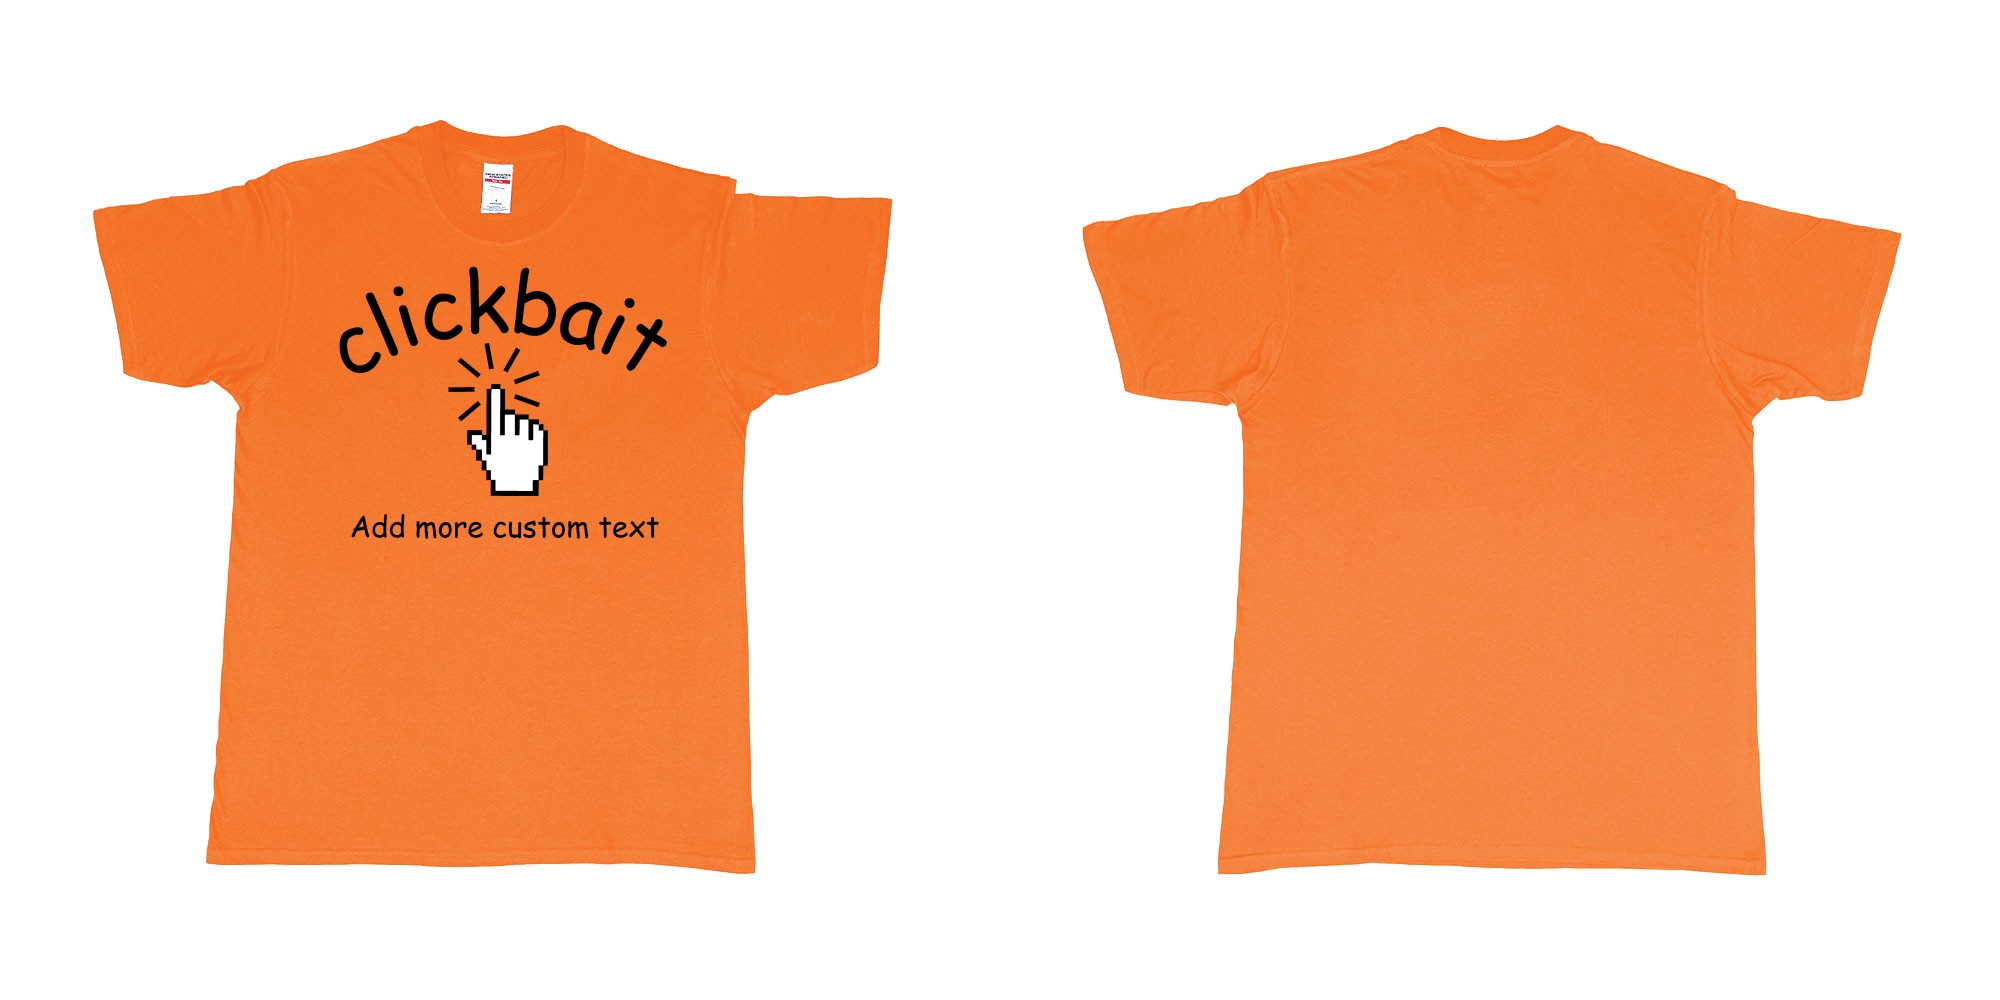 Custom tshirt design clickbait mouse click custom text tshirt printing in fabric color orange choice your own text made in Bali by The Pirate Way